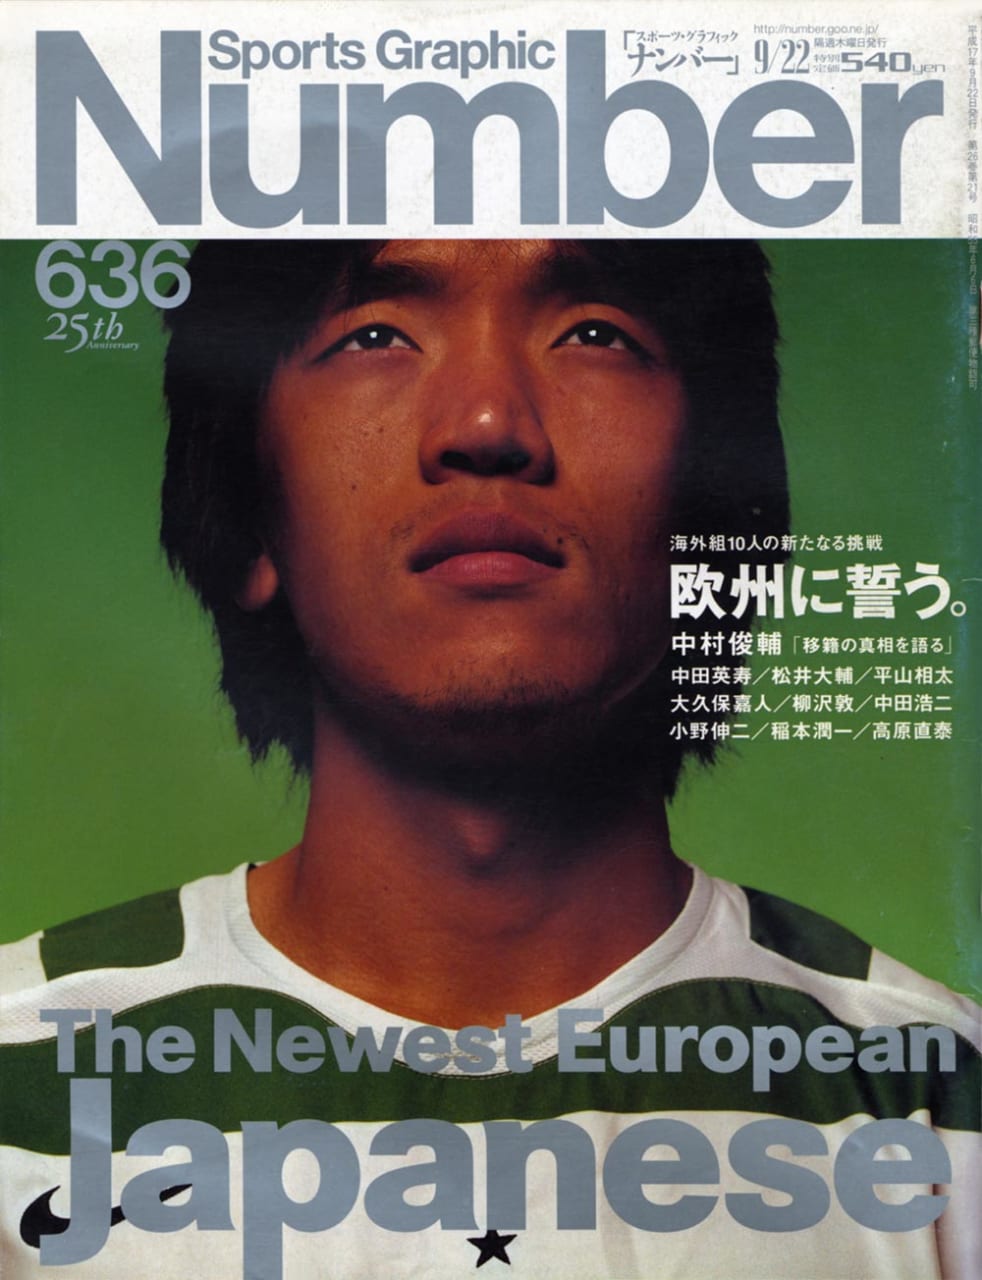 Sports Graphic Number 636号
2005年9月8日発売
表紙撮影：カイ・サワベ